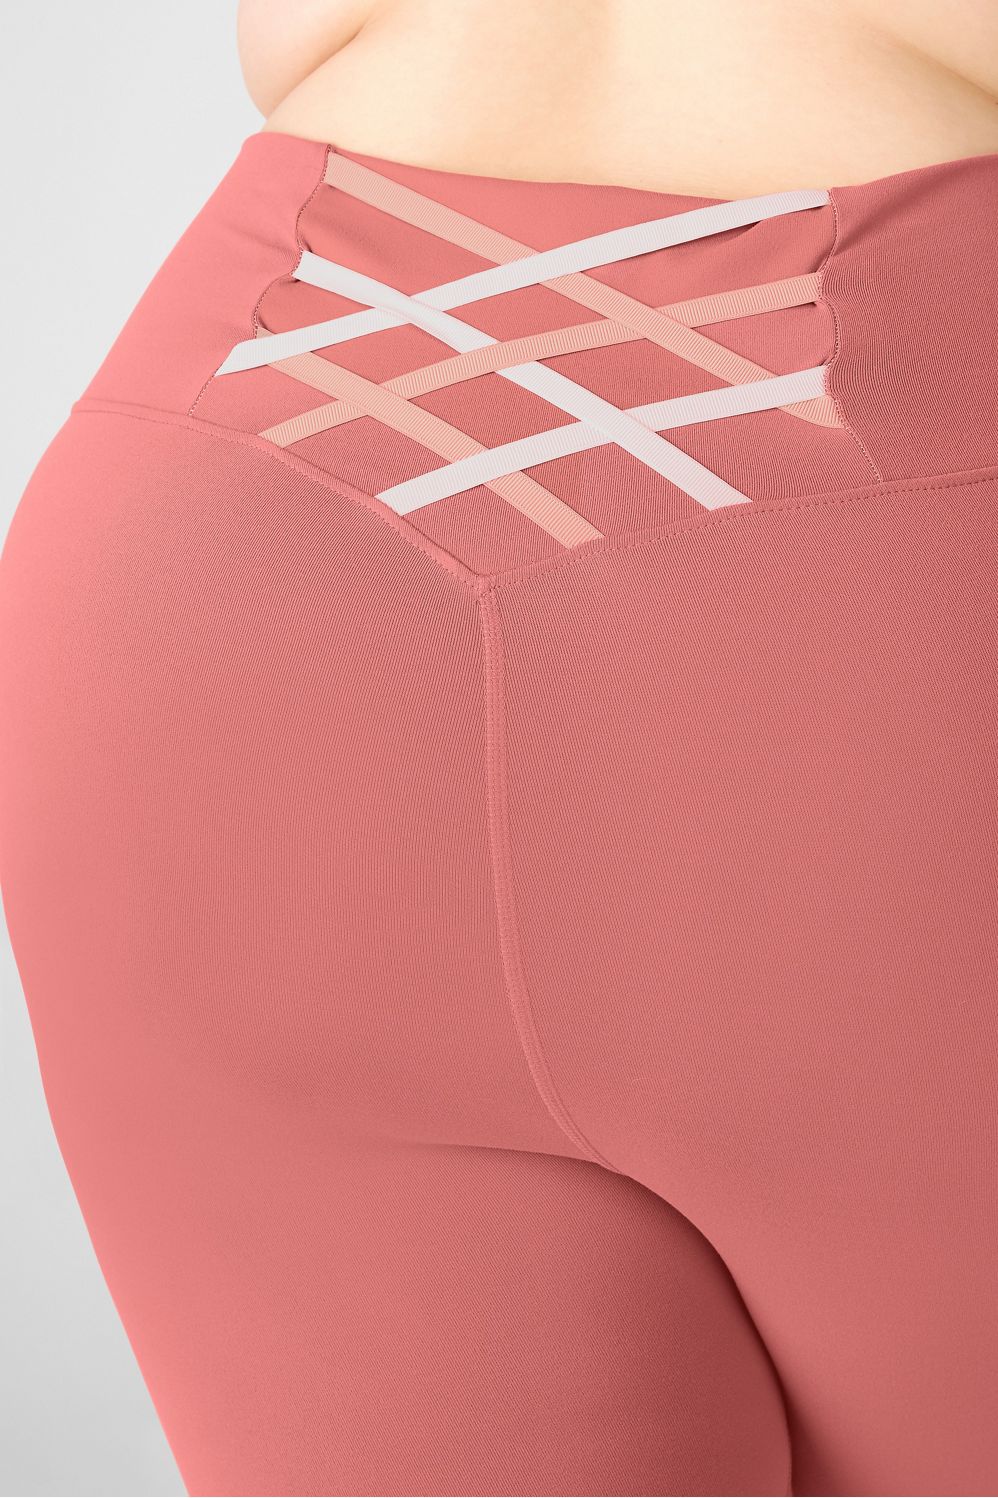 Fabletics Boost PowerHold Hot Pink Criss Cross Back High-Waisted 7/8 Legging  XS - $30 - From Erin